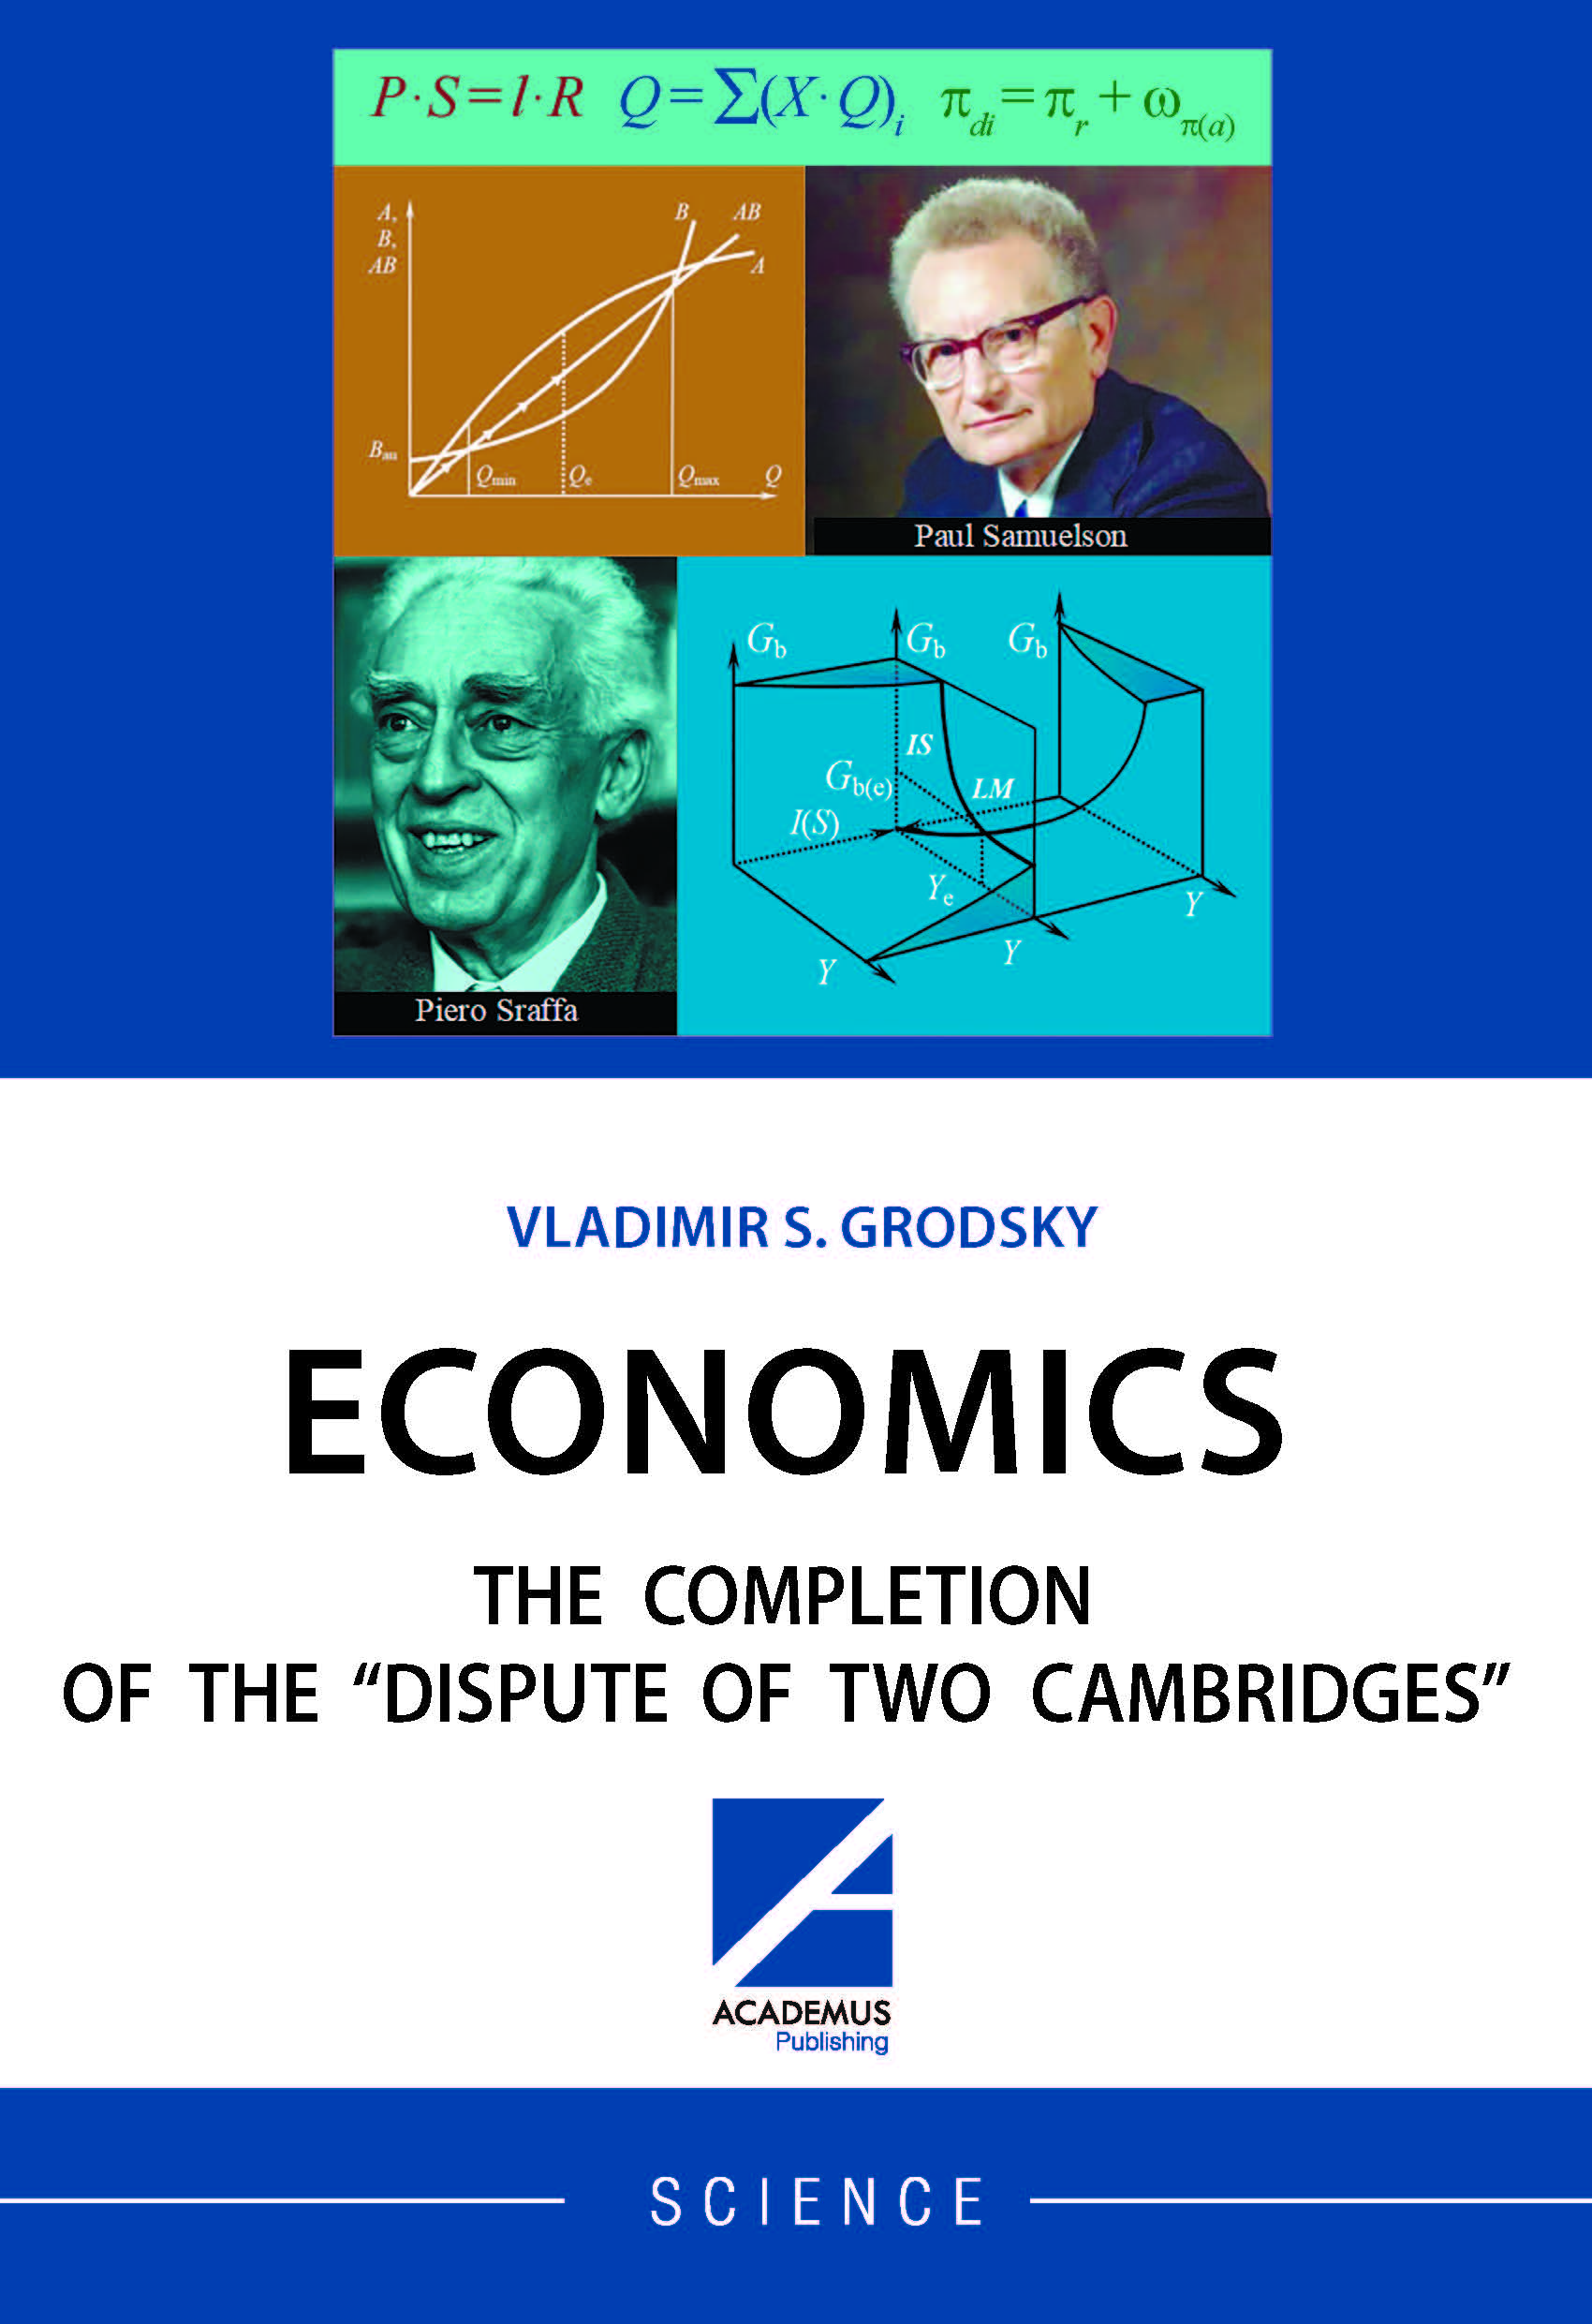                         ECONOMICS: THE COMPLETION OF THE “DISPUTE OF TWO CAMBRIDGES”
            